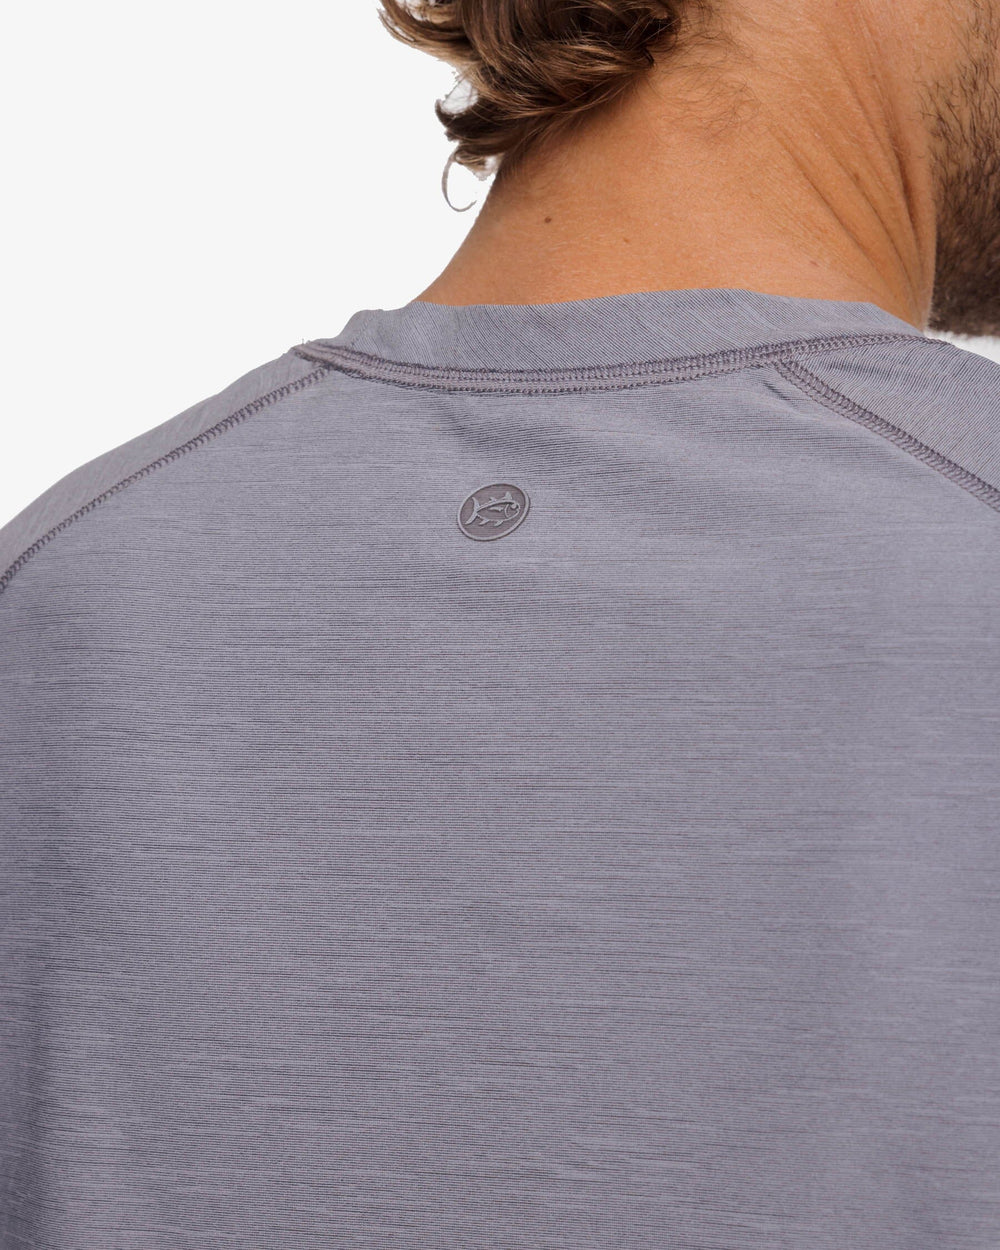 The yoke view of the Southern Tide brrr°®-illiant Performance Tee by Southern Tide - Steel Grey